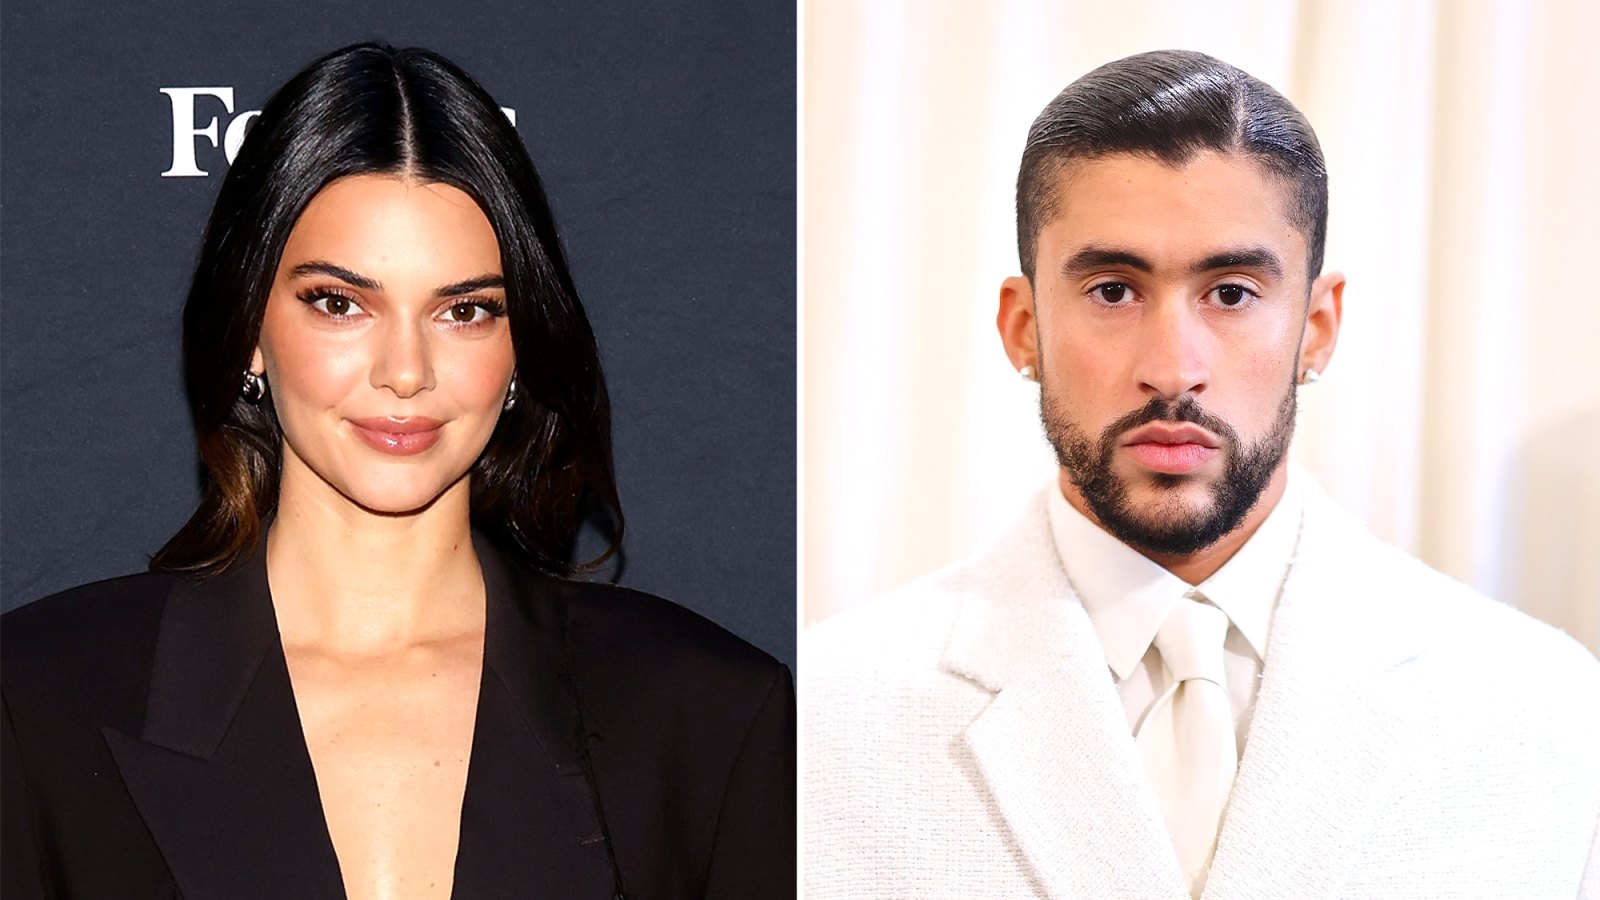 Kendall Jenner and Bad Bunny Have Hung Out a Few Times Since Breakup